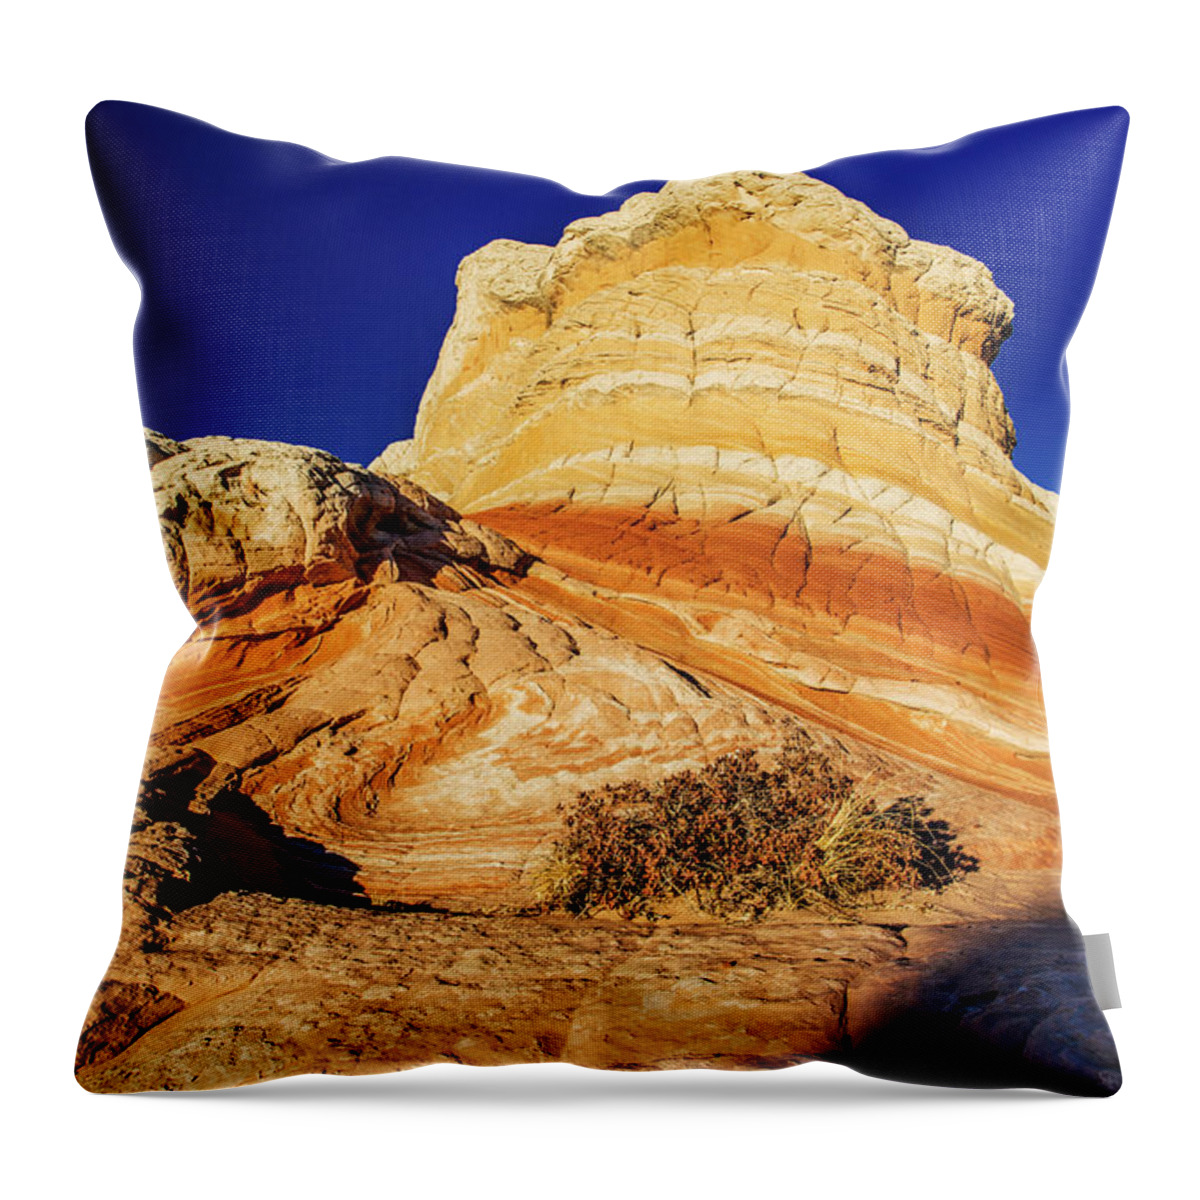 Glimpse Throw Pillow featuring the photograph Glimpse by Chad Dutson